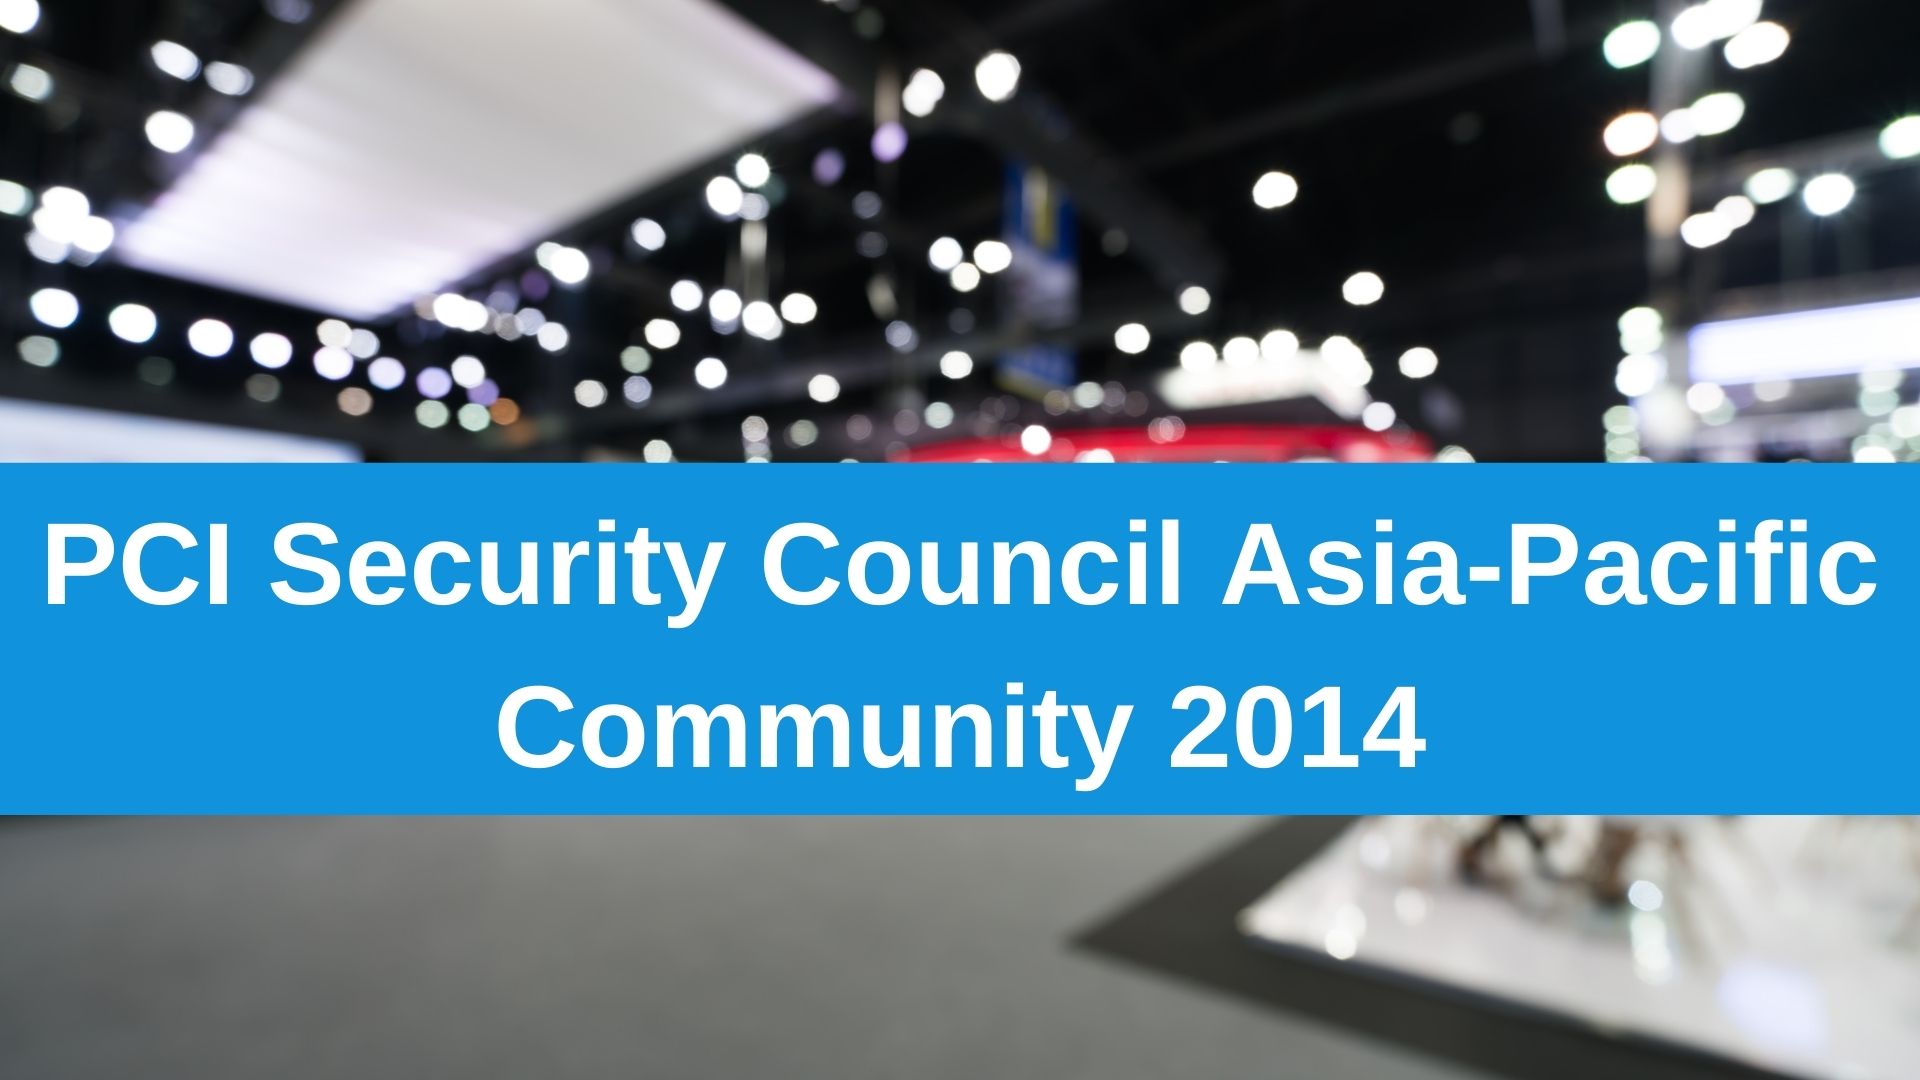 https://www.groundlabs.com/wp-content/uploads/2014/12/PCI-Security-Council-Asia-Pacific-Community.jpg